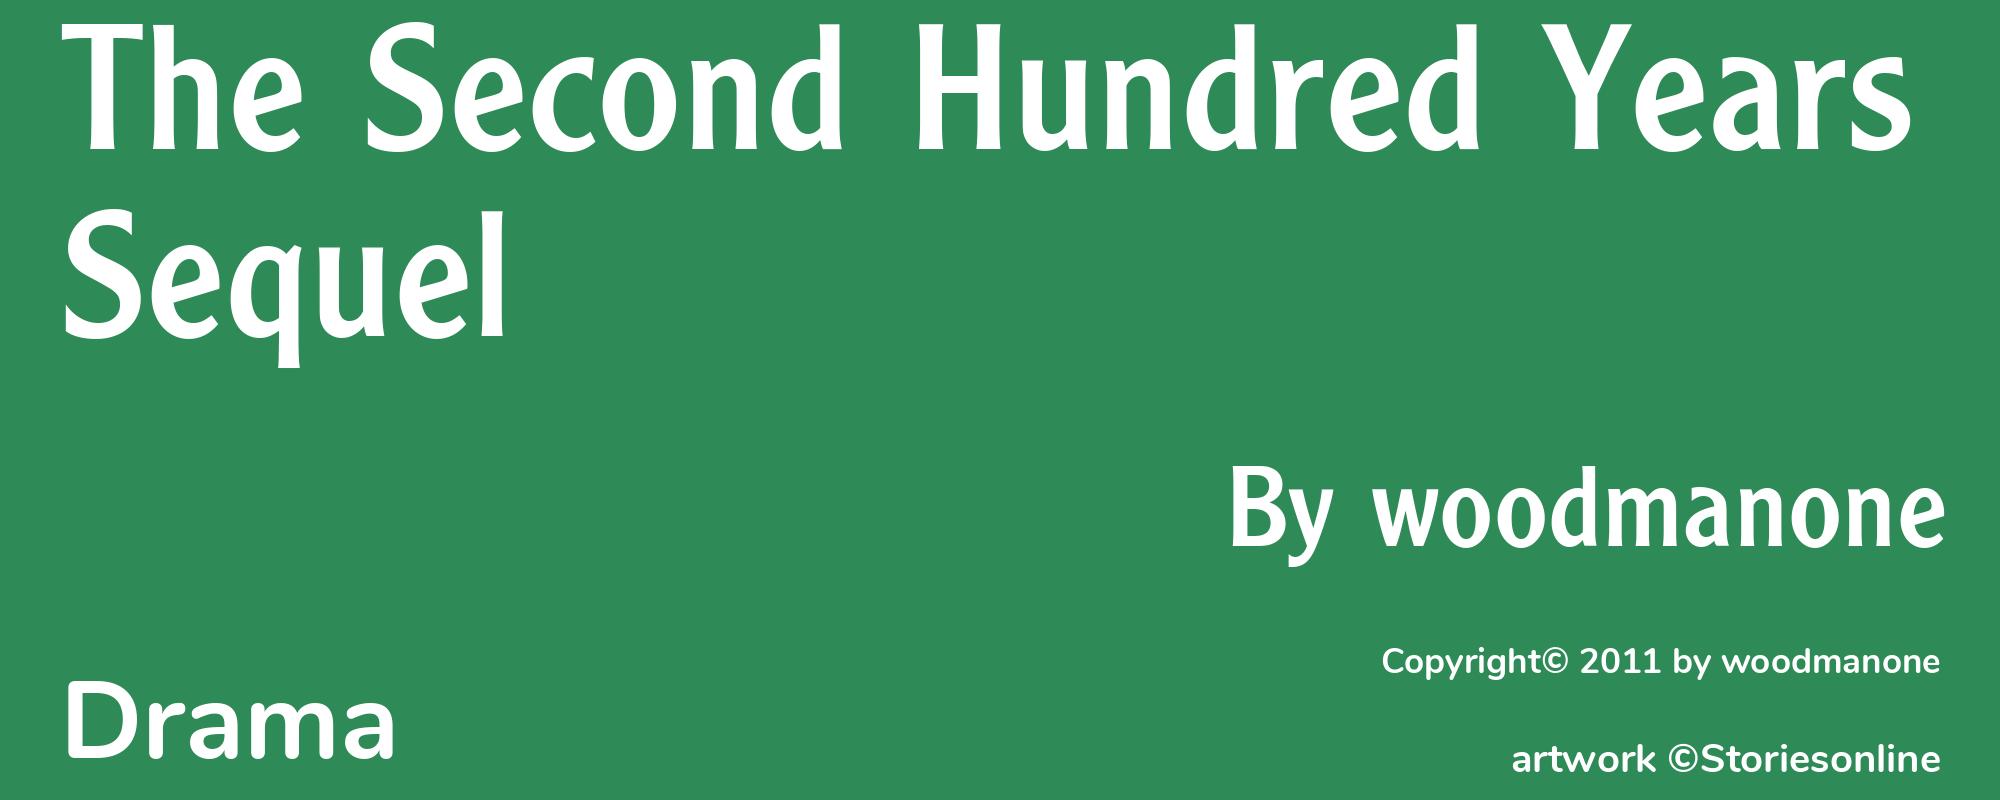 The Second Hundred Years Sequel - Cover